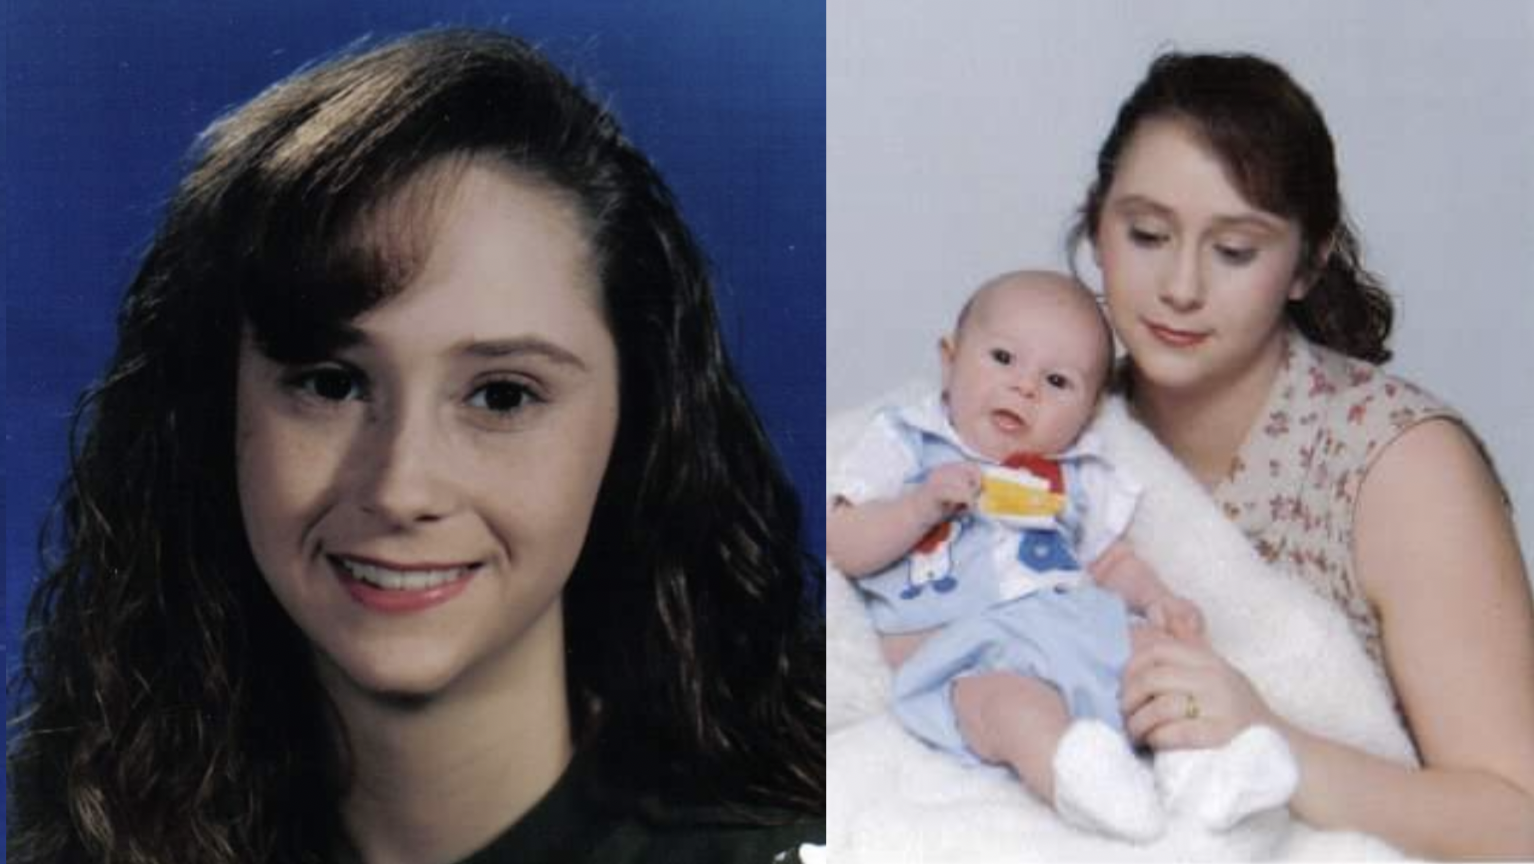 a young teen girl with brown hair in a school photo at left, and in a portrait with her infant son on the right